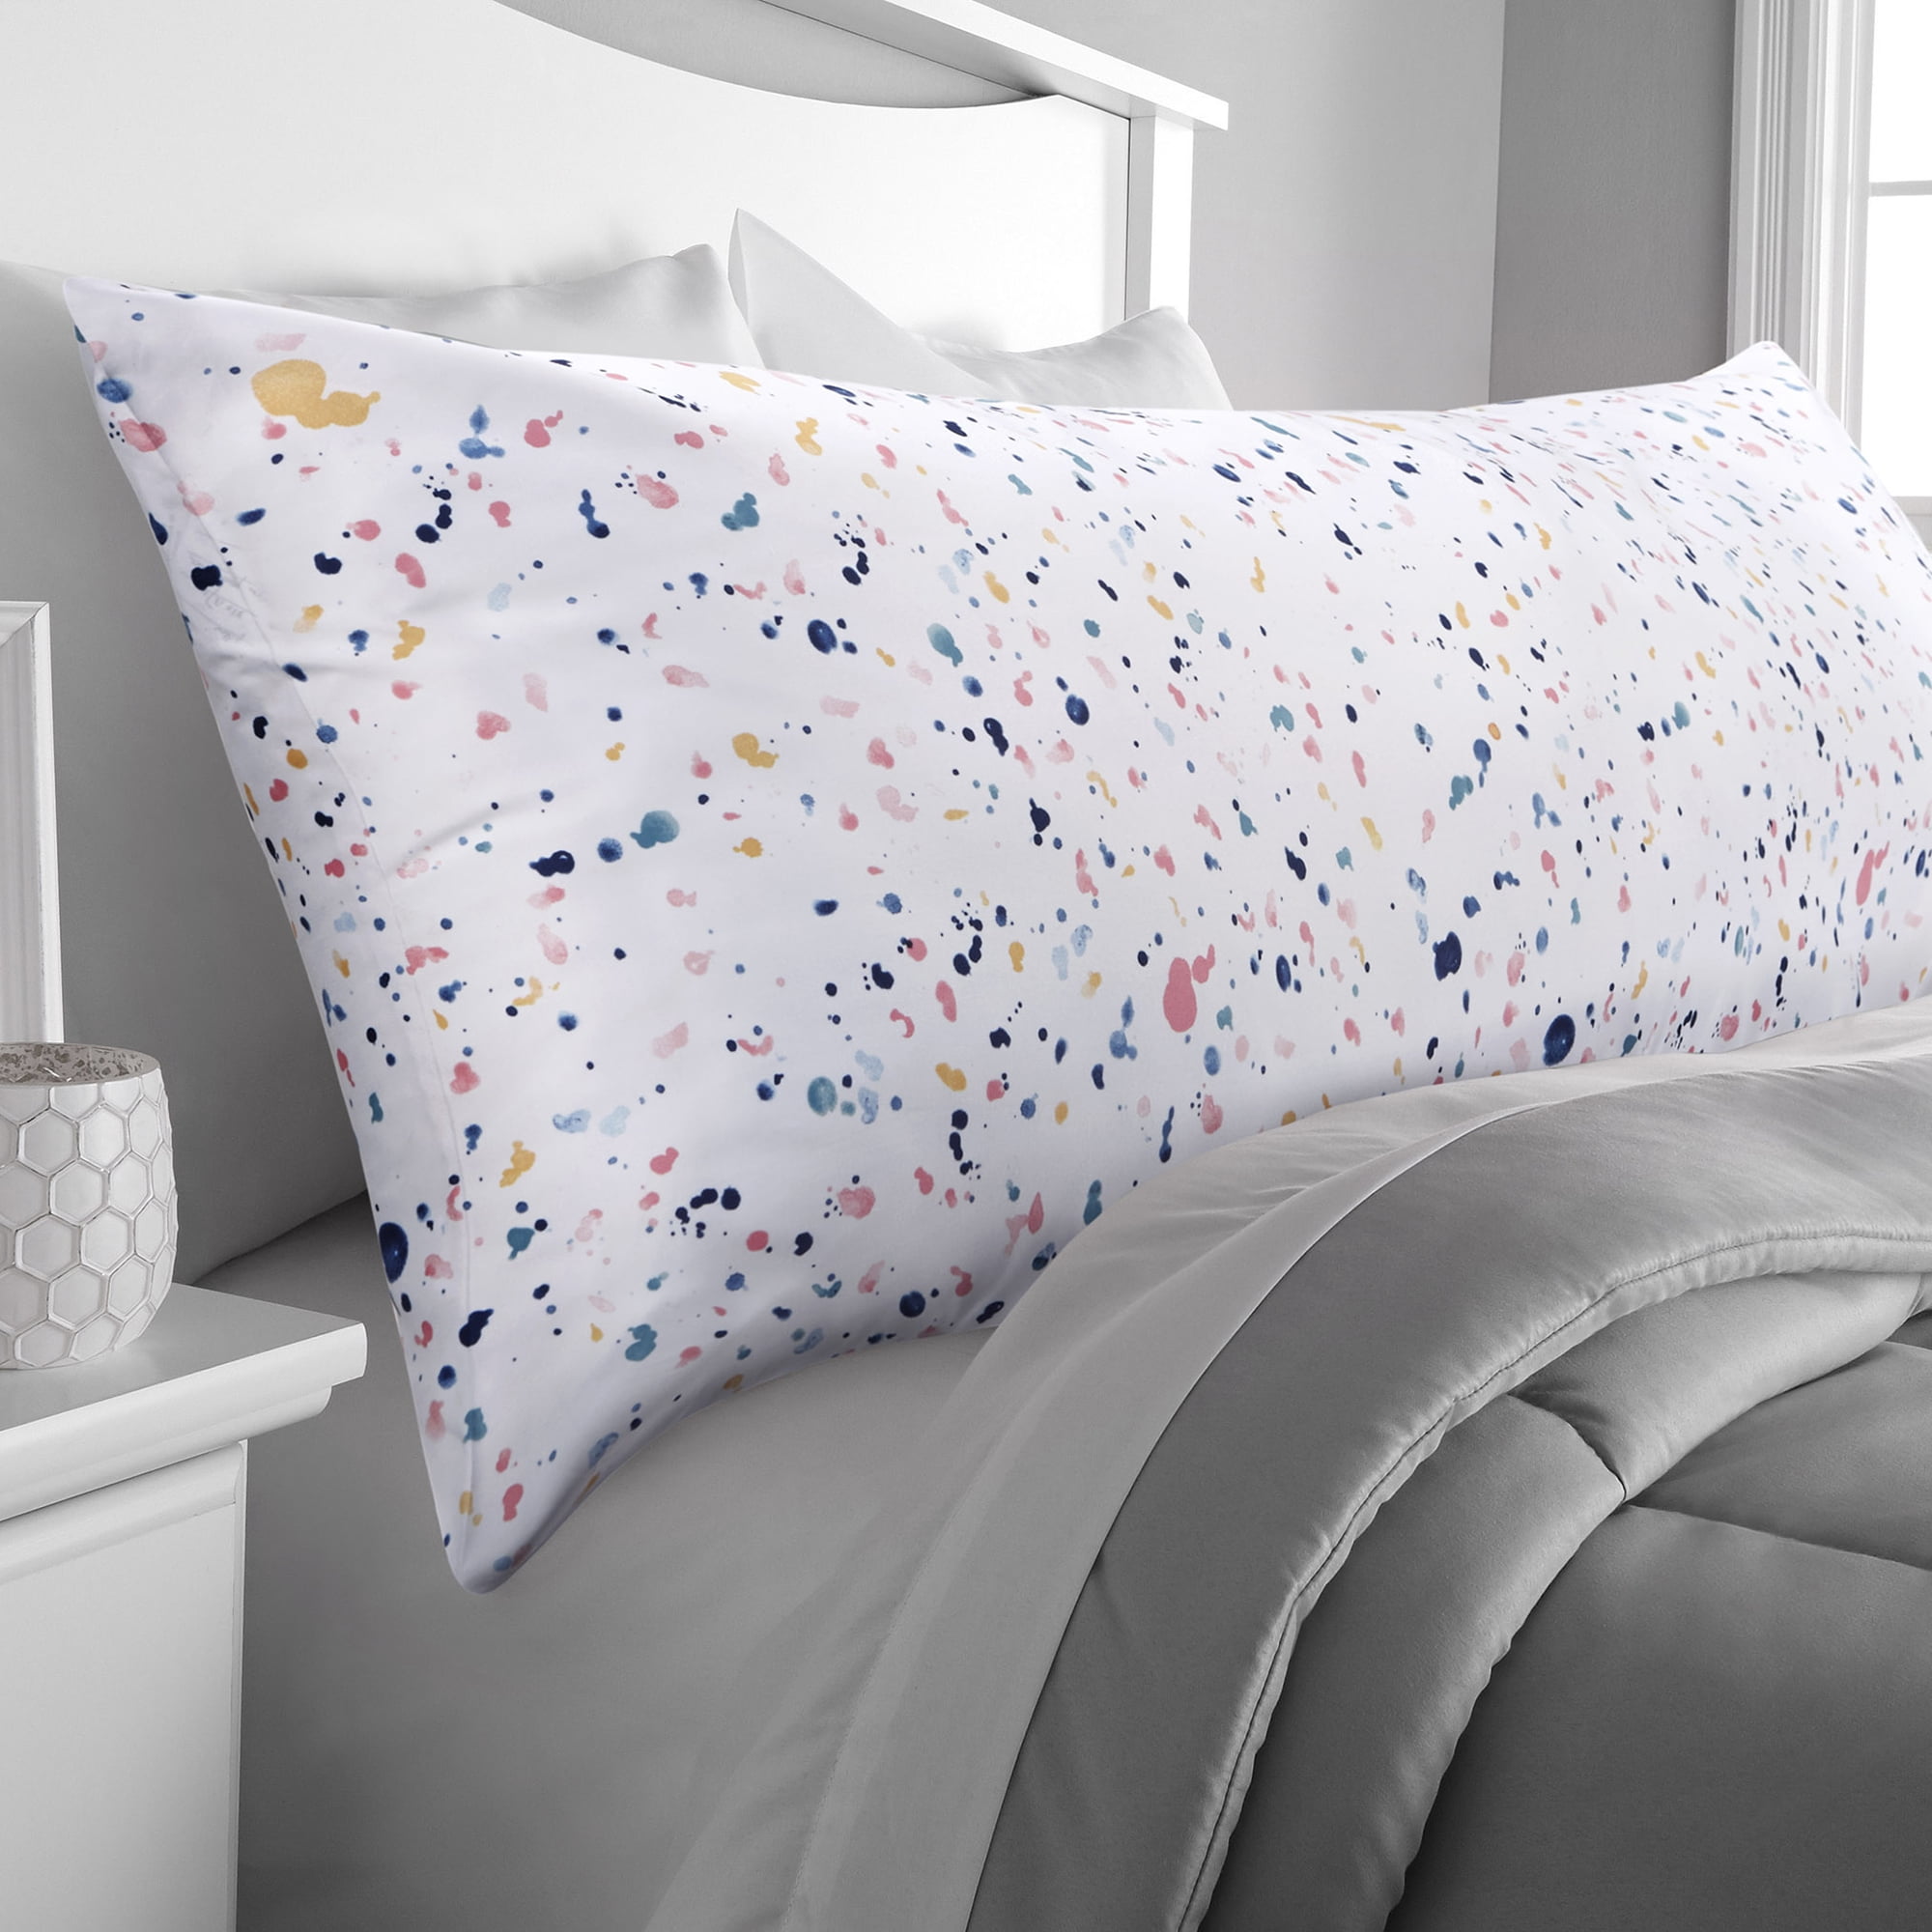 Mainstays Woven Microfiber Printed Dots Body Pillow Cover, Zipper ...